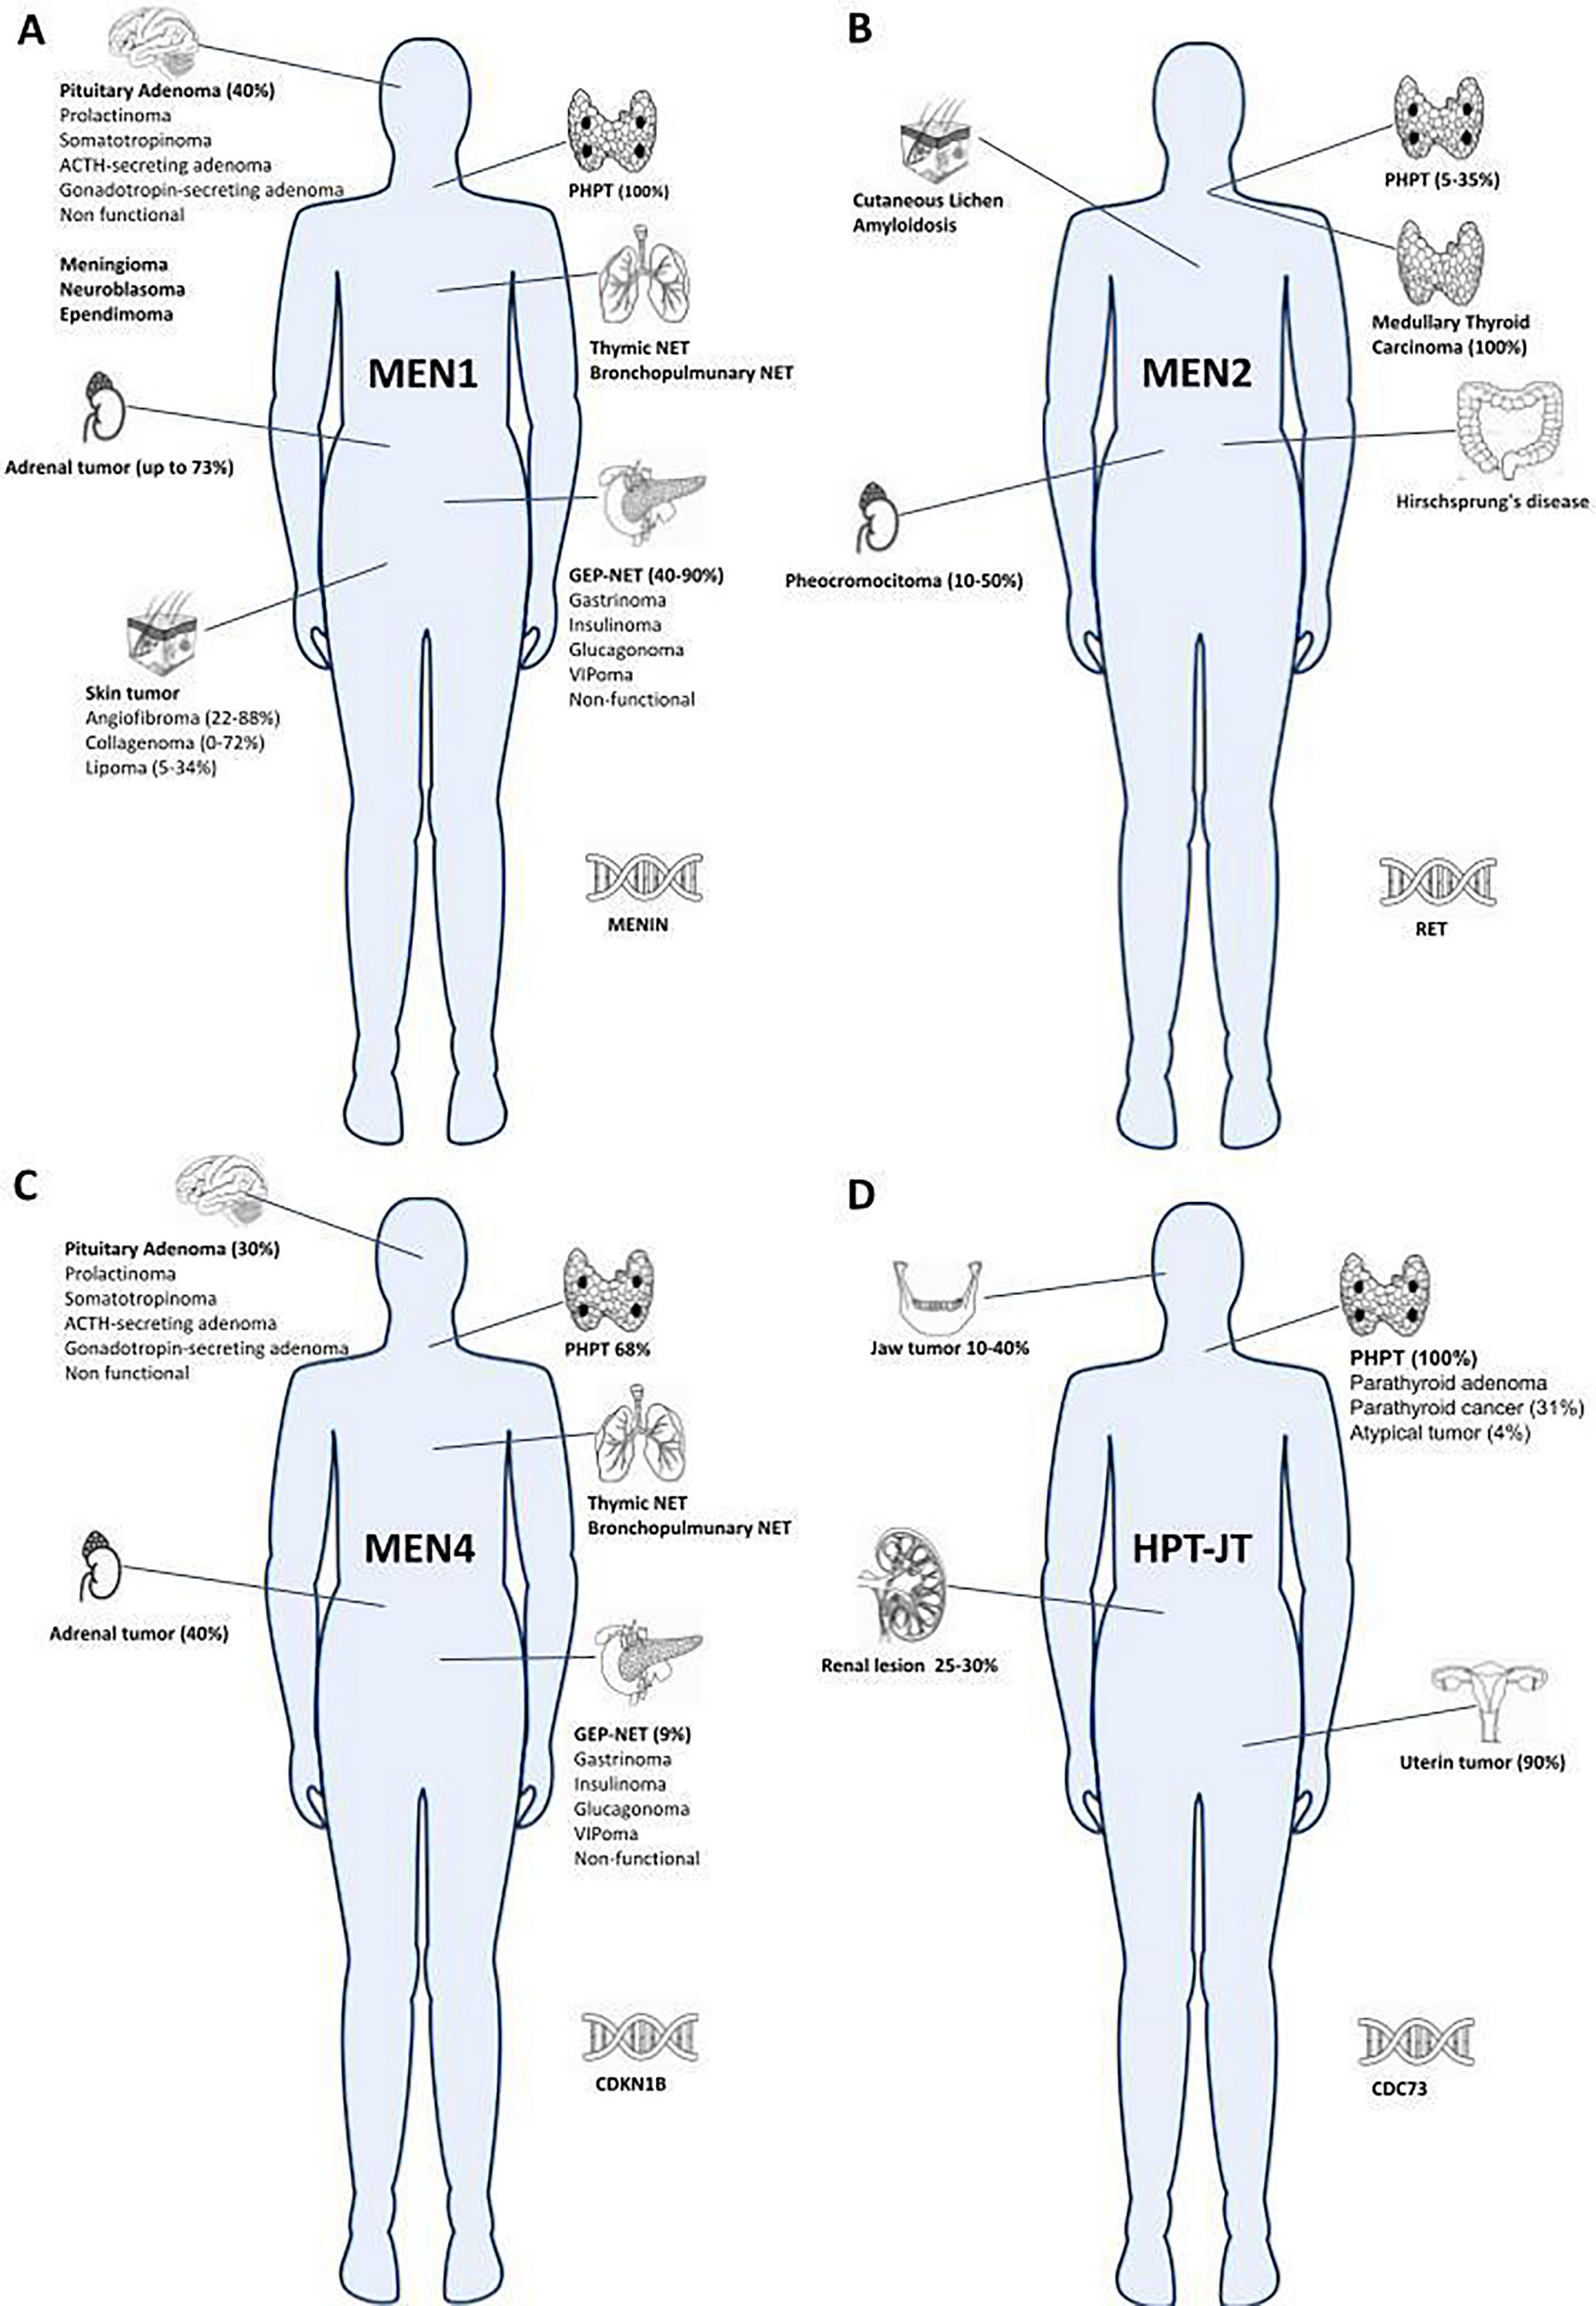 Familial states of primary hyperparathyroidism: an update